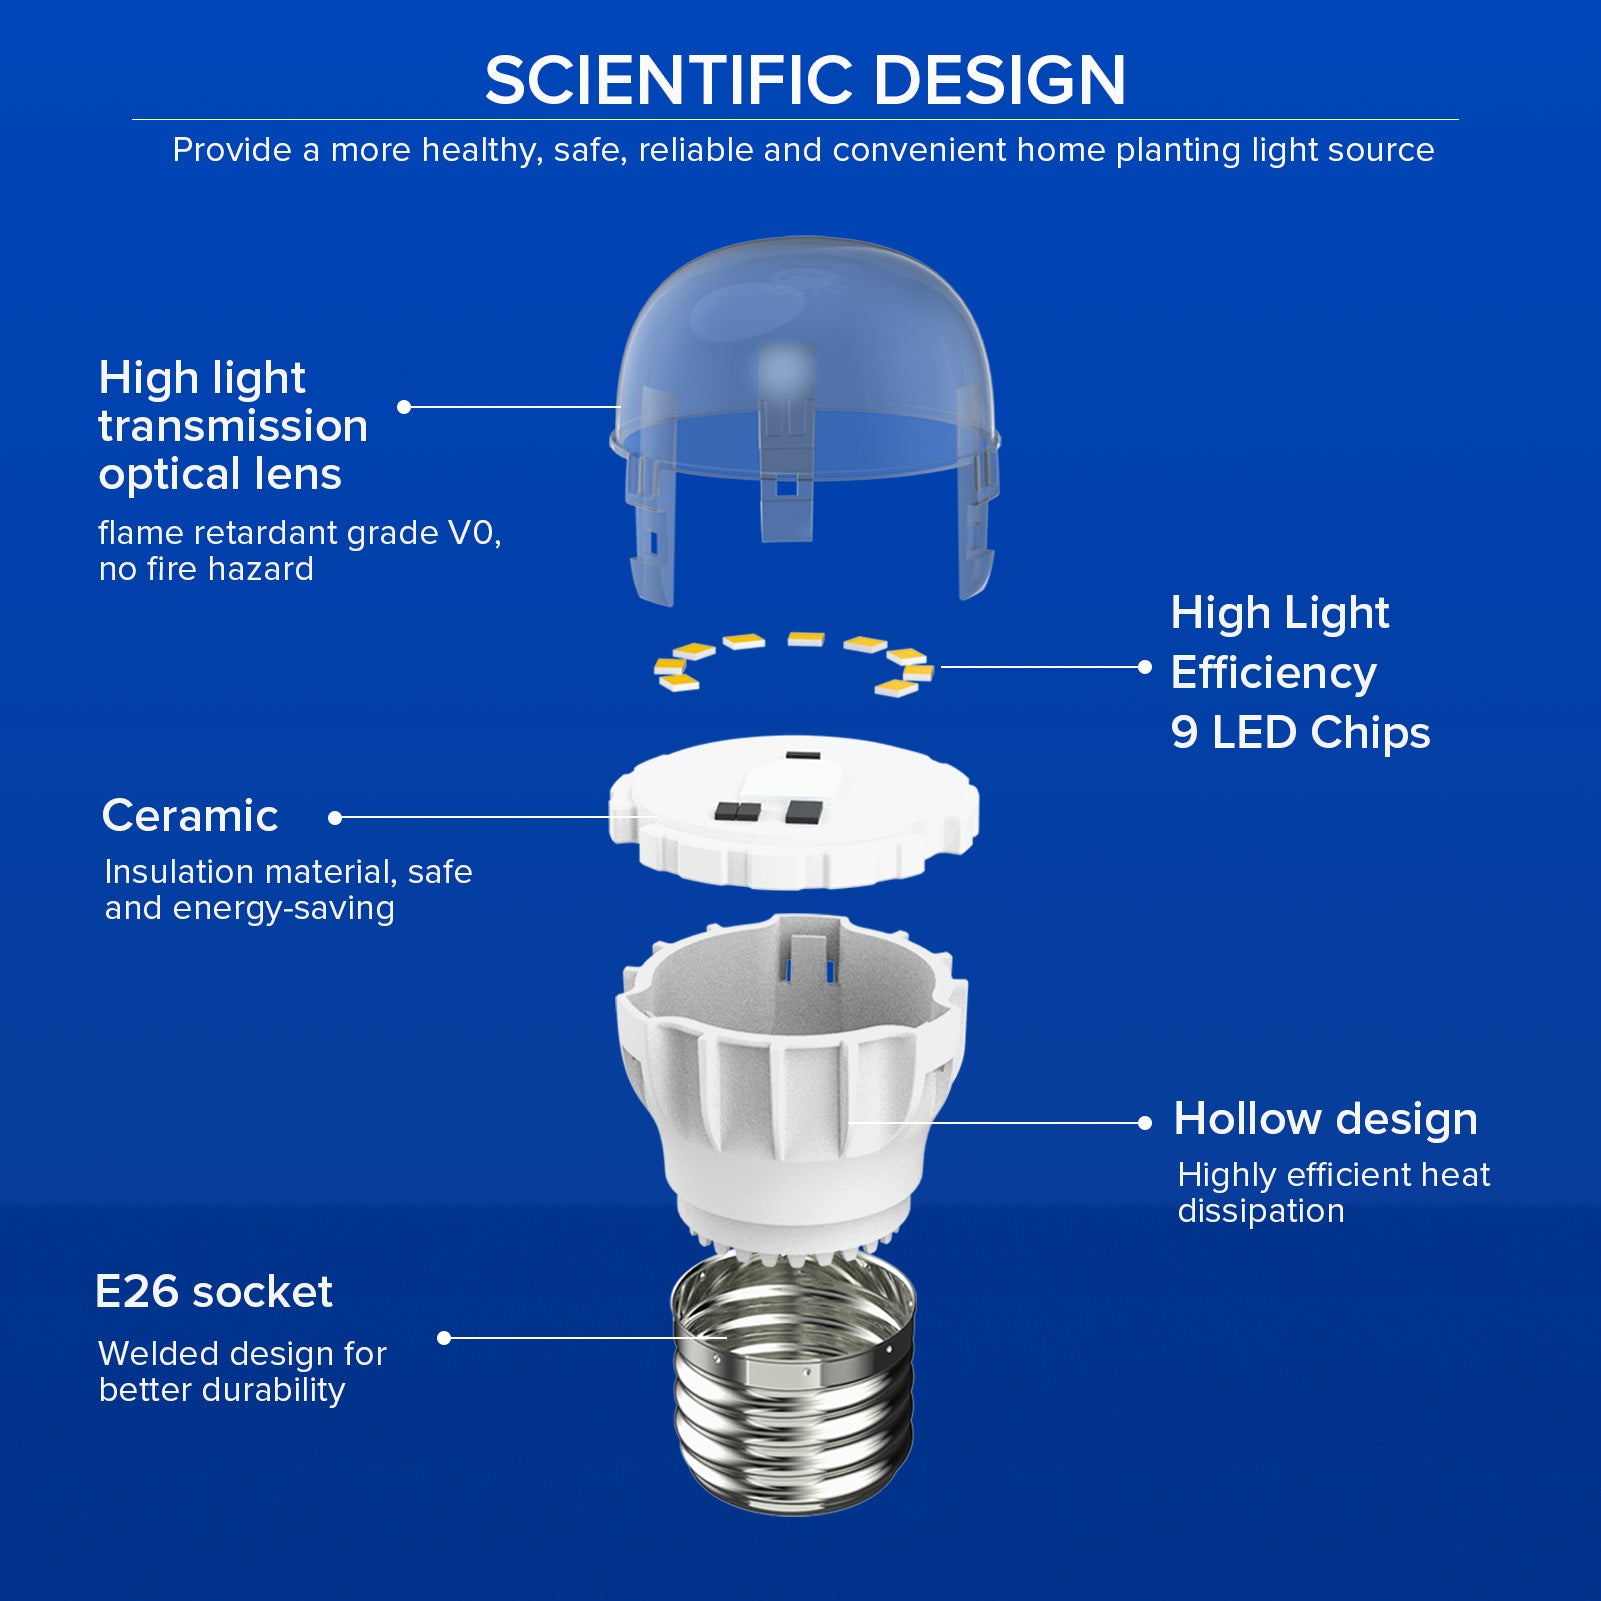 A11 4W LED Light Bulb with hollow design, ceramic patented technology, high quality IC chips and high light transmission optical lens